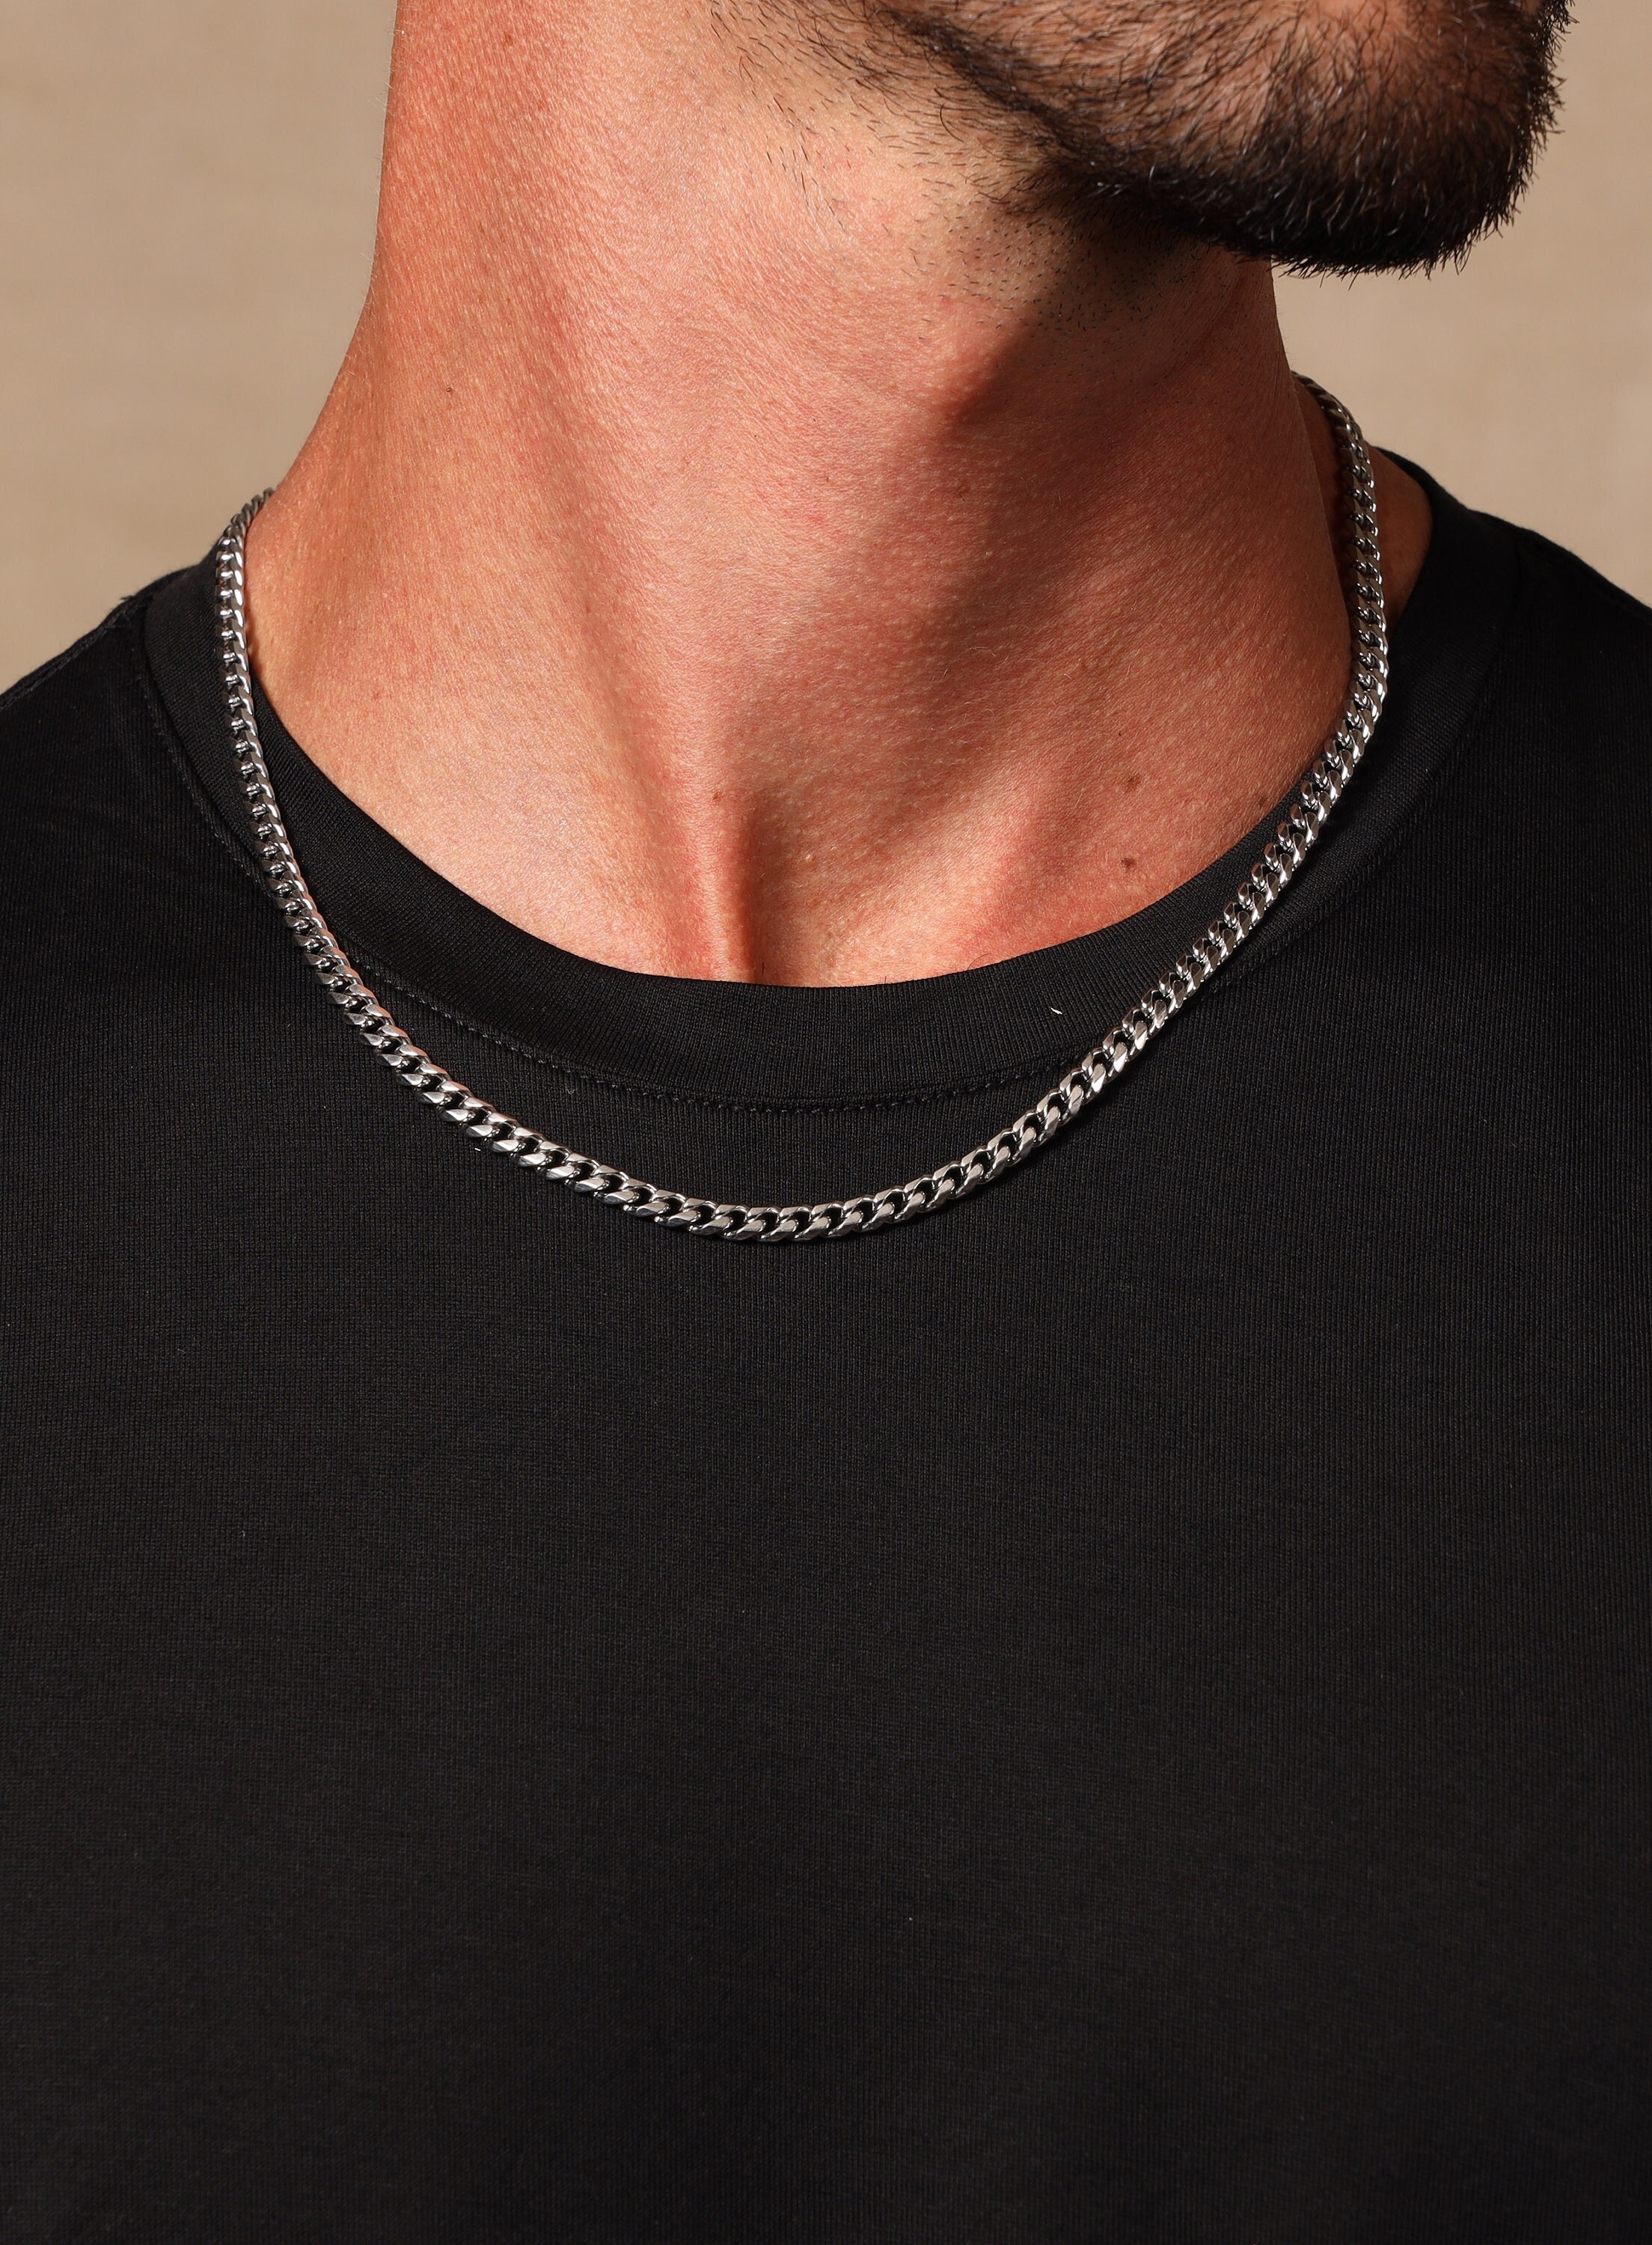 Waterproof 5mm Miami Cuban Beveled Chain Necklace for Men